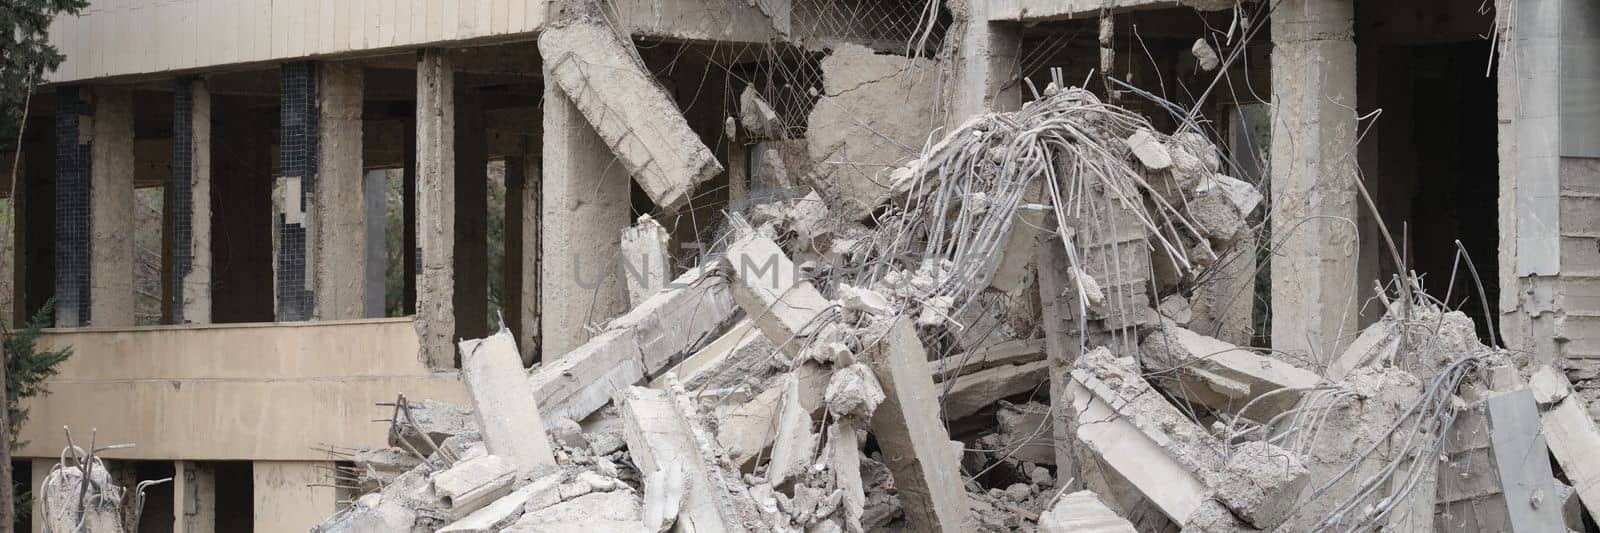 Destroyed cement building warrior rocket strike or earthquake by kuprevich